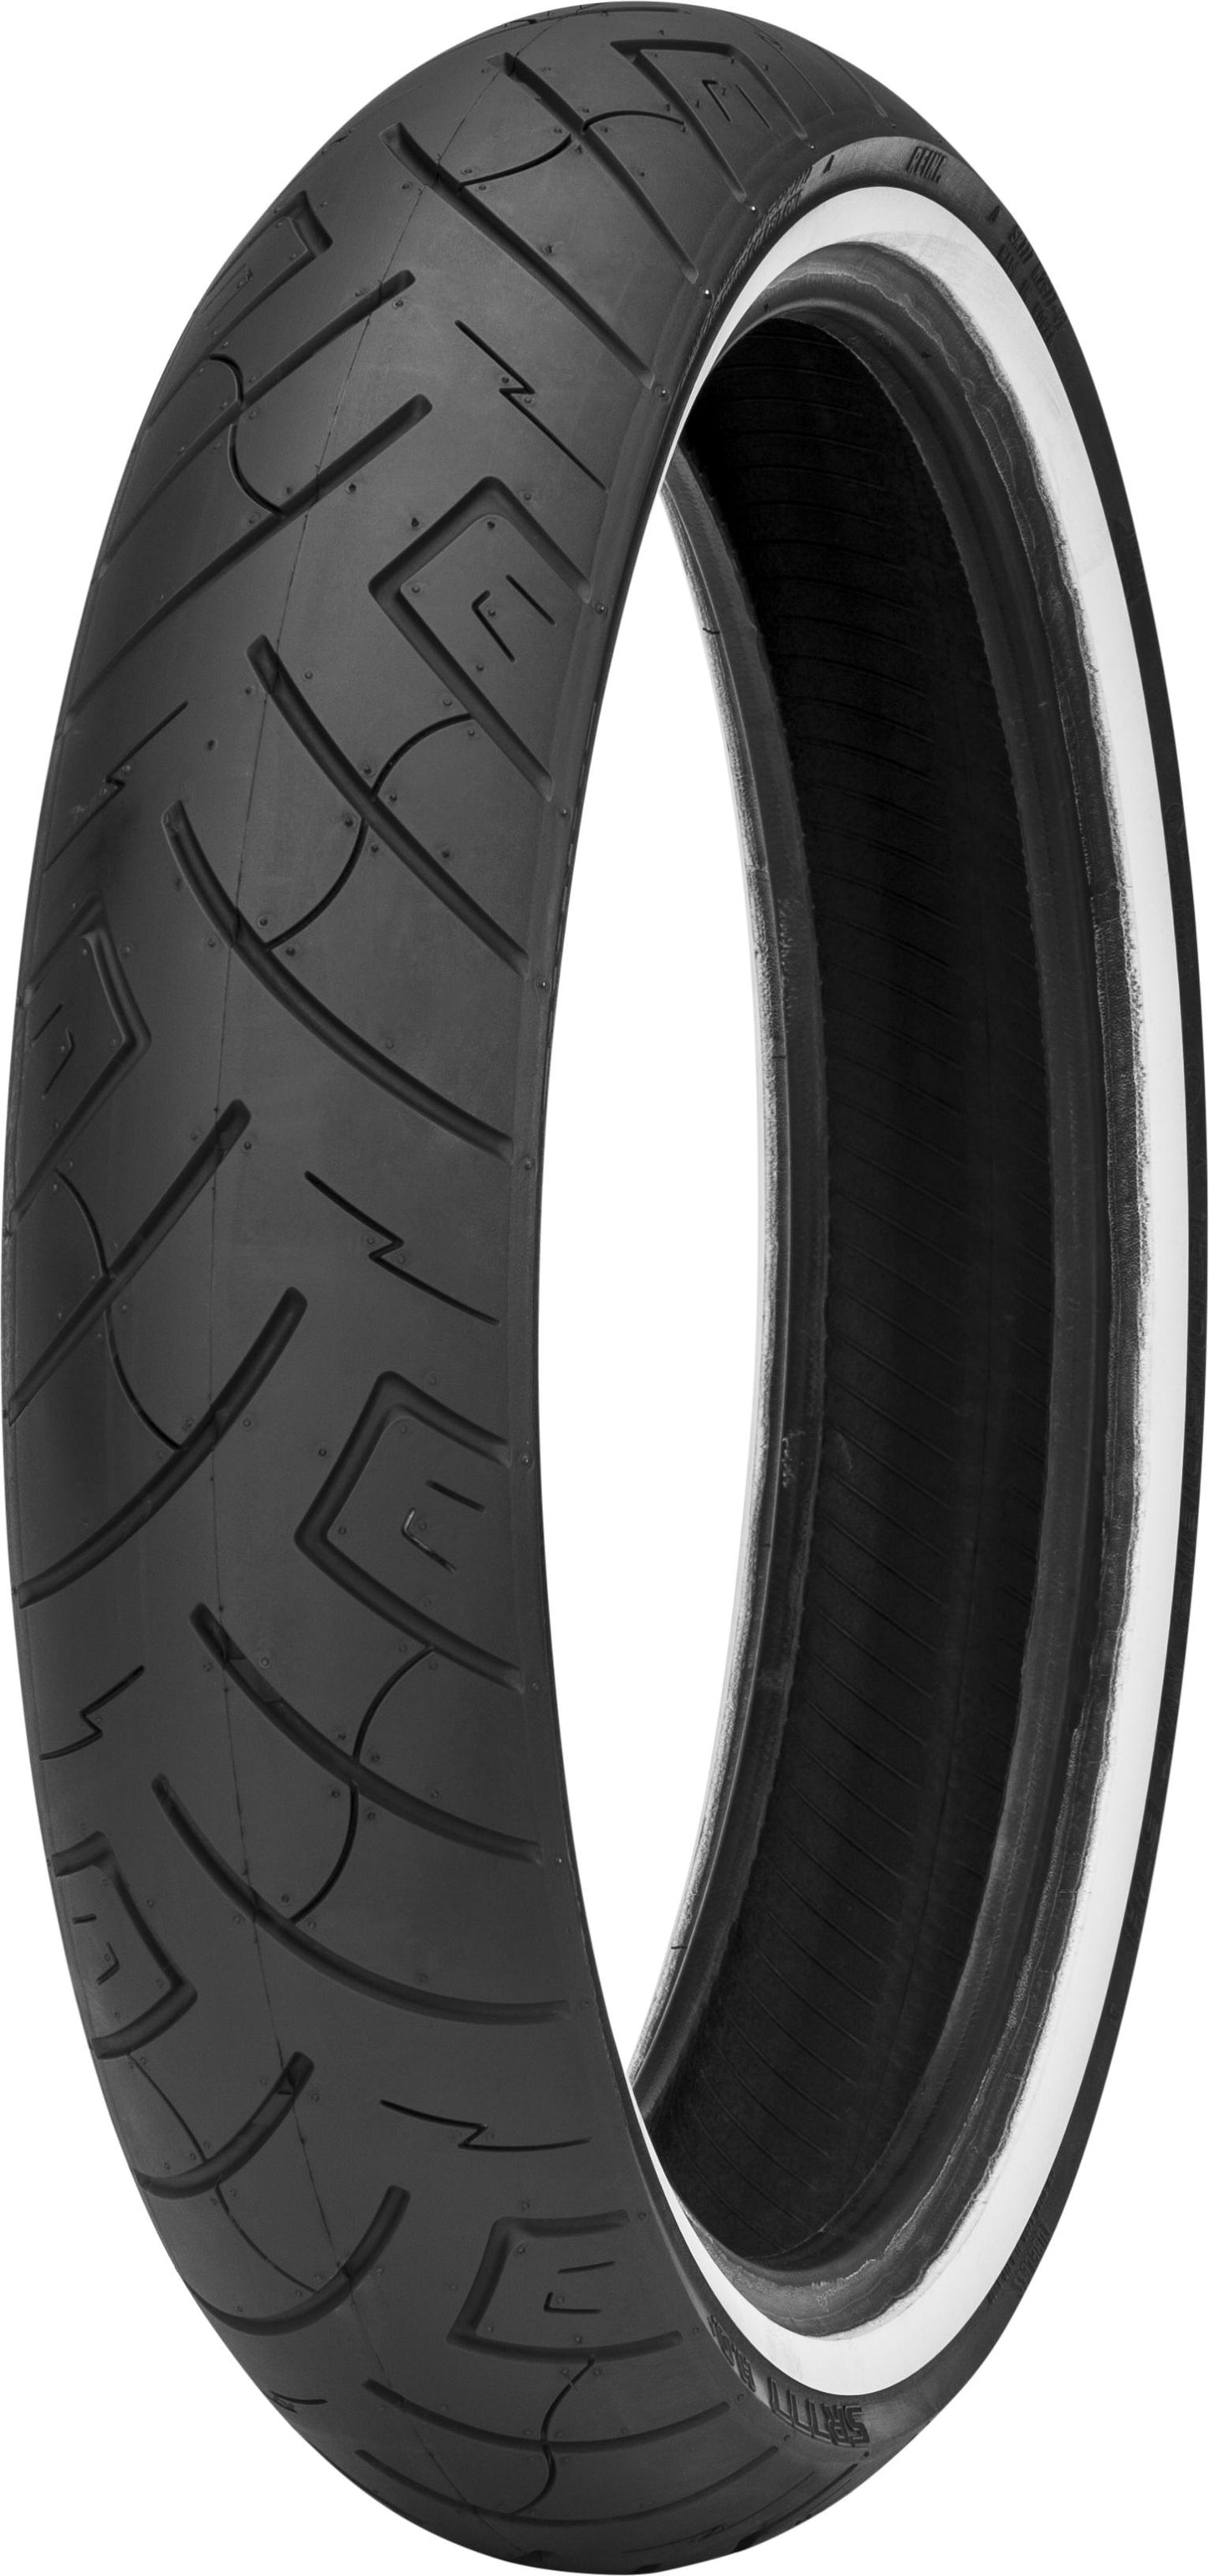 Tire 777 Cruiser Front 130-70b18 69h Belted Bias W-w